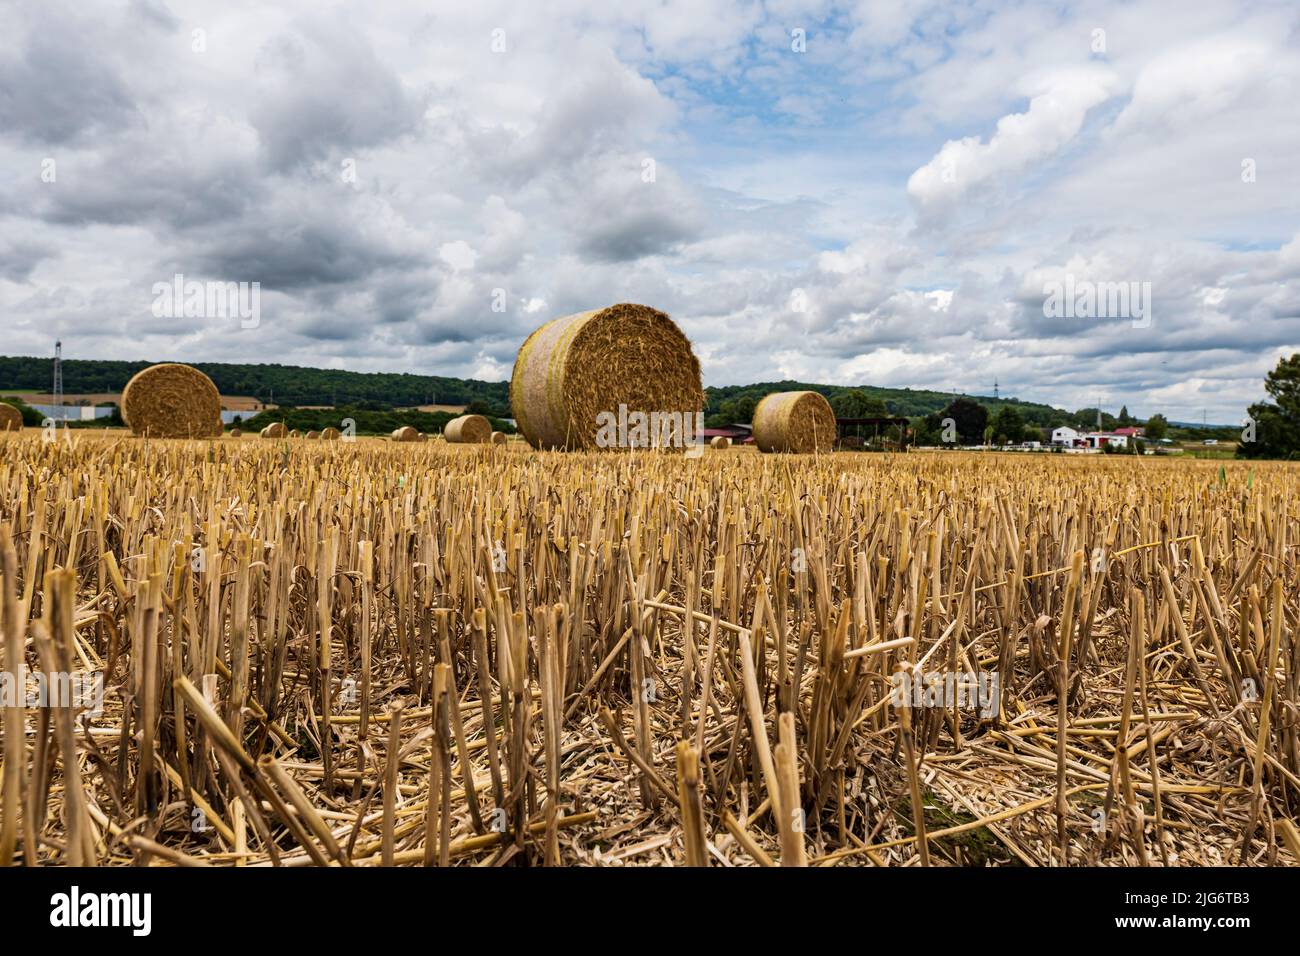 Large straw rolls lie on a harvested stubble field. Worm's-eye view Stock Photo